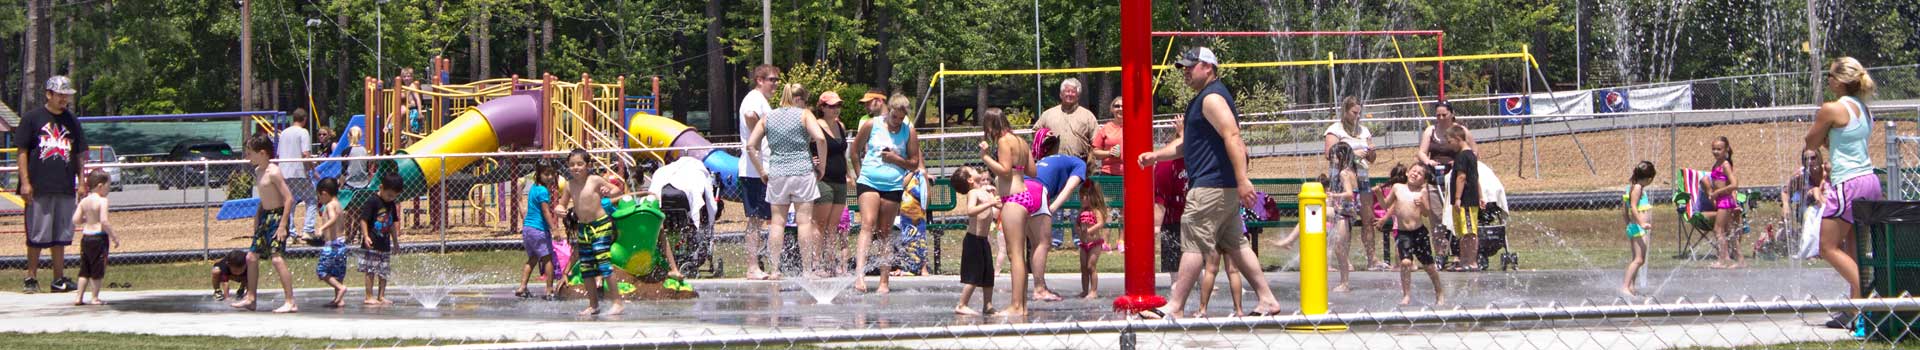 Sportsman lake park splash pad with a gathering playing in the water